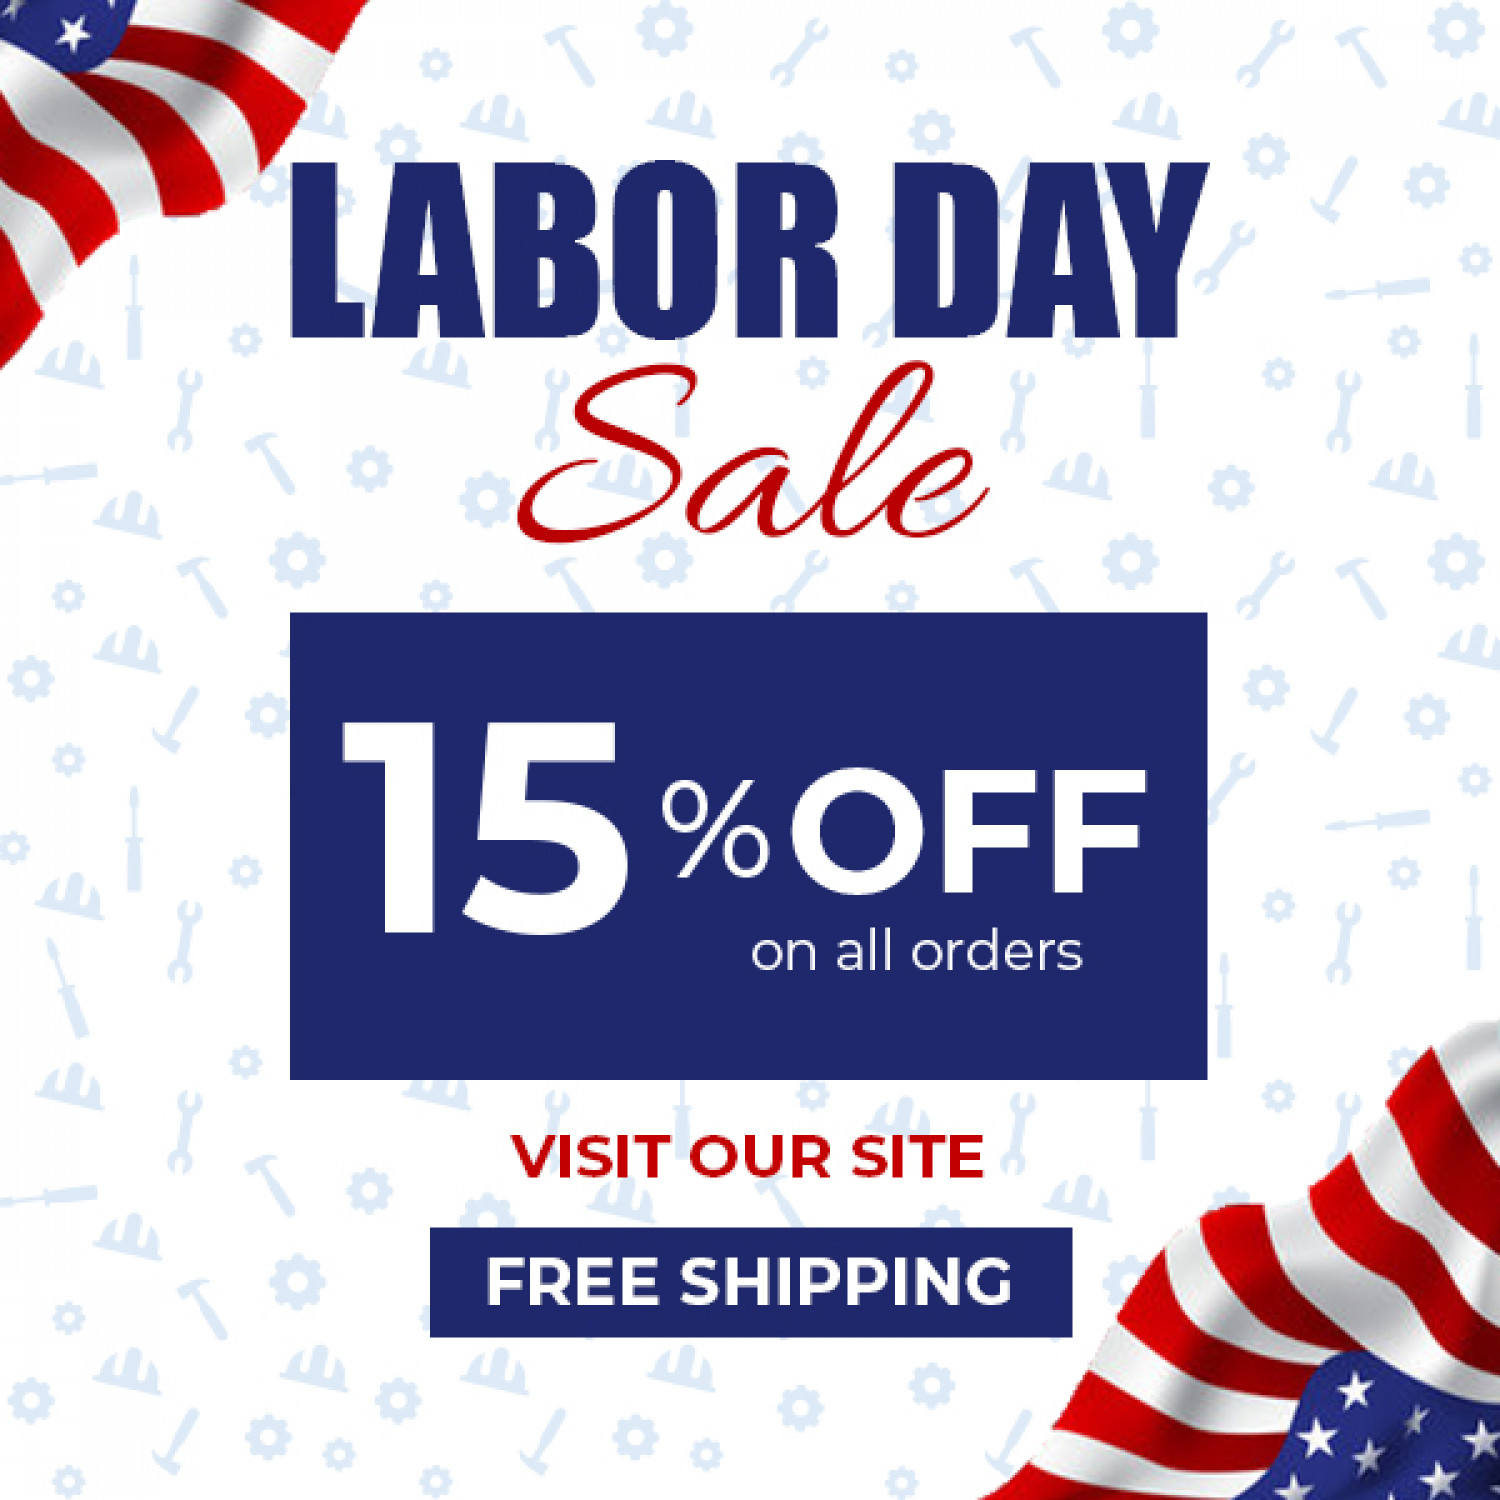 LABOR DAY SALE - Flat 15% OFF on Pet Healthcare Supplies!! Infographic